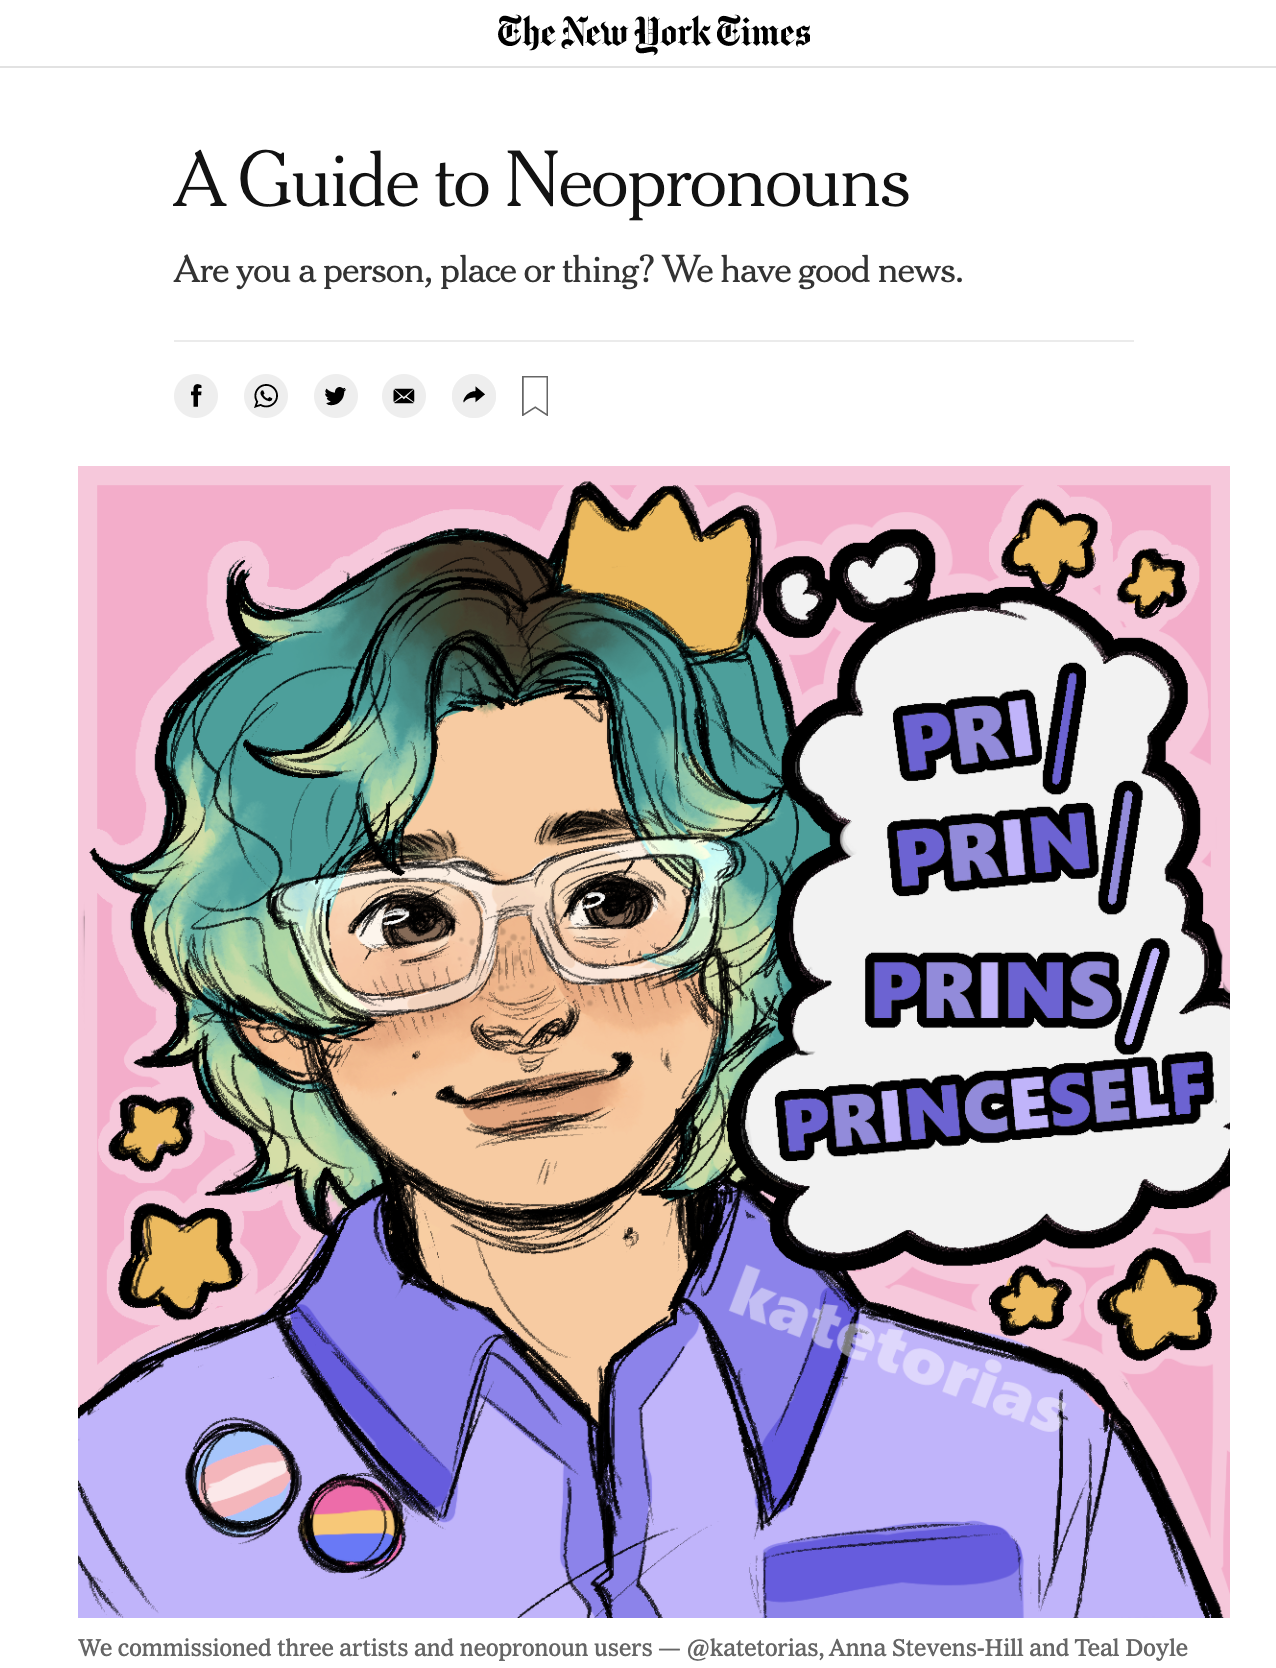 A screen shot of the New York Times Article "A Guide to Neopronouns" by Ezra Marcus showing an illustration self-portrait by @katetorias with the words Pri/Prin/Prins/Princeself next to Princeself. Pri is shown with tan skin, green hair, white glasses, a gold crown against a pink background.